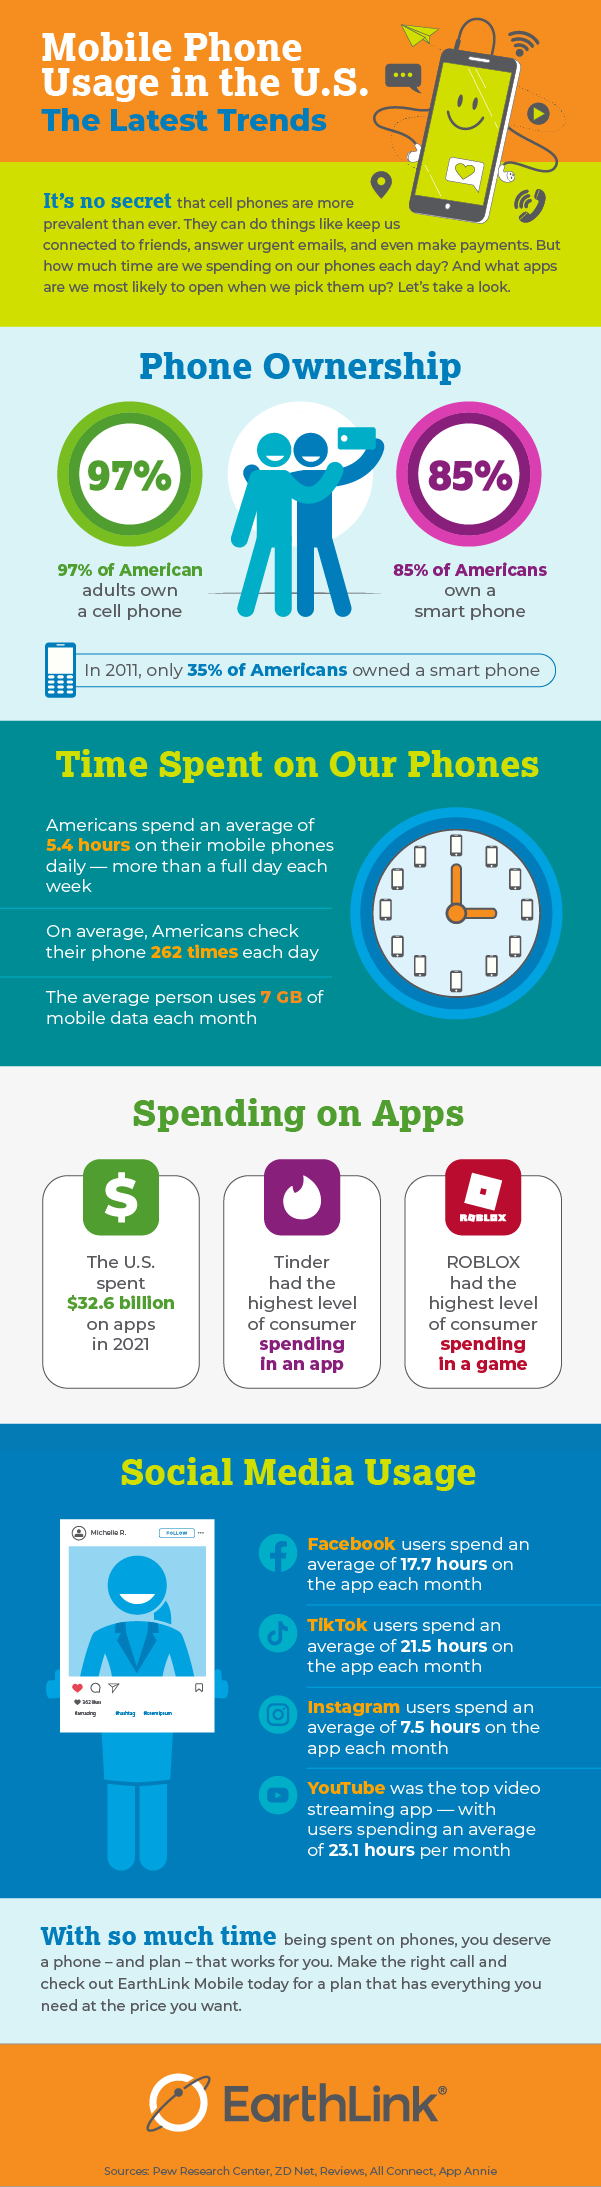 An infographic about mobile phone usage in the U.S.